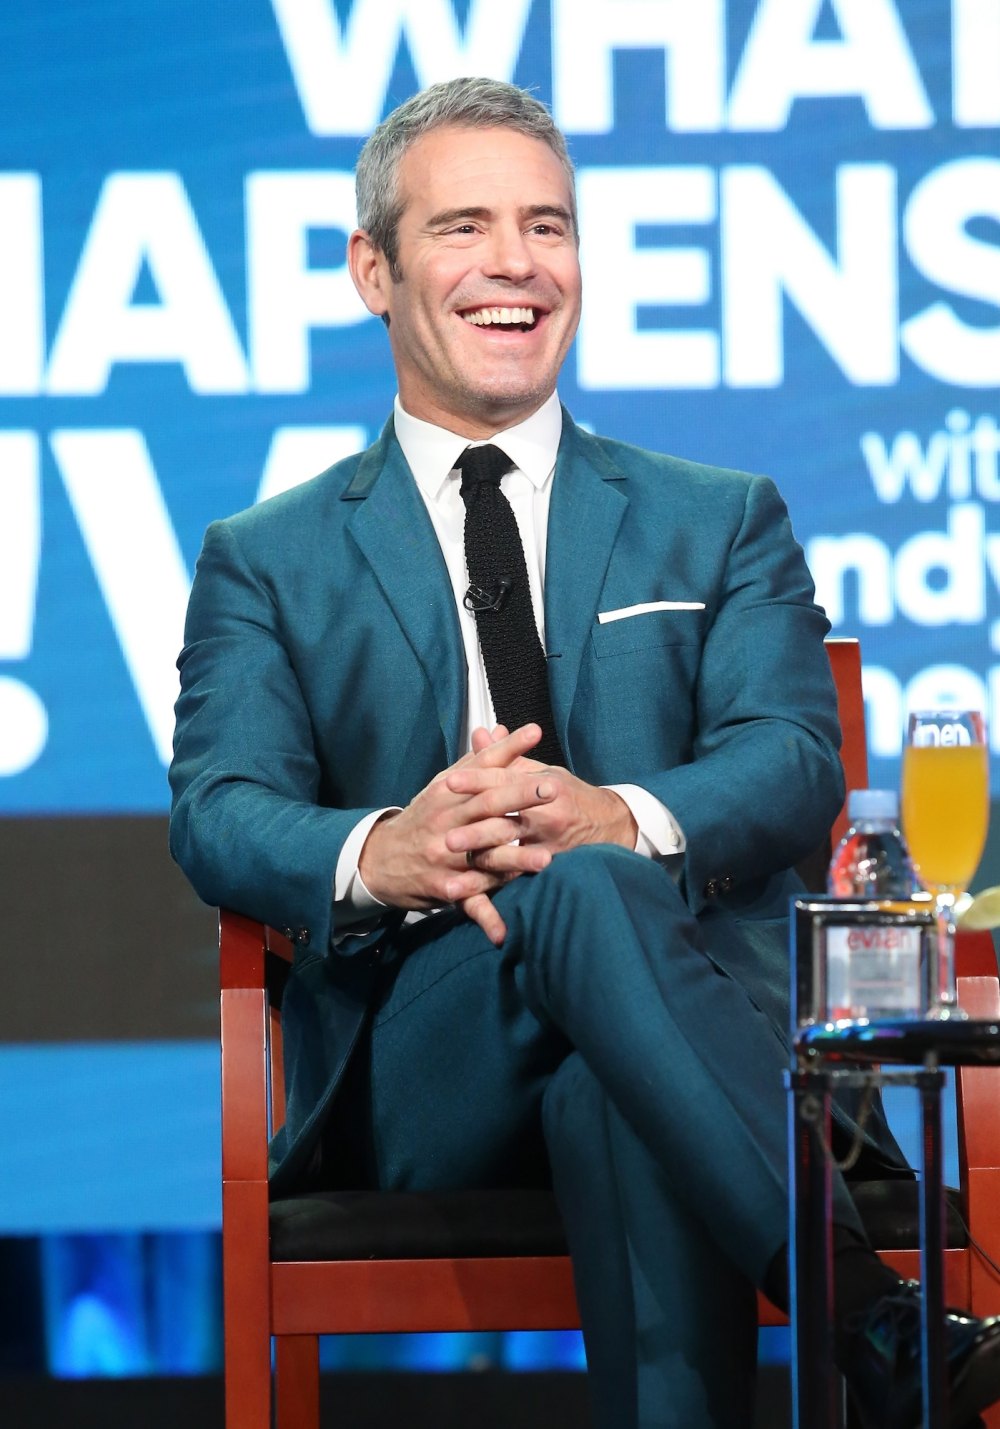 Why Andy Cohen admits he feels 'salty' about competing WWHL shows